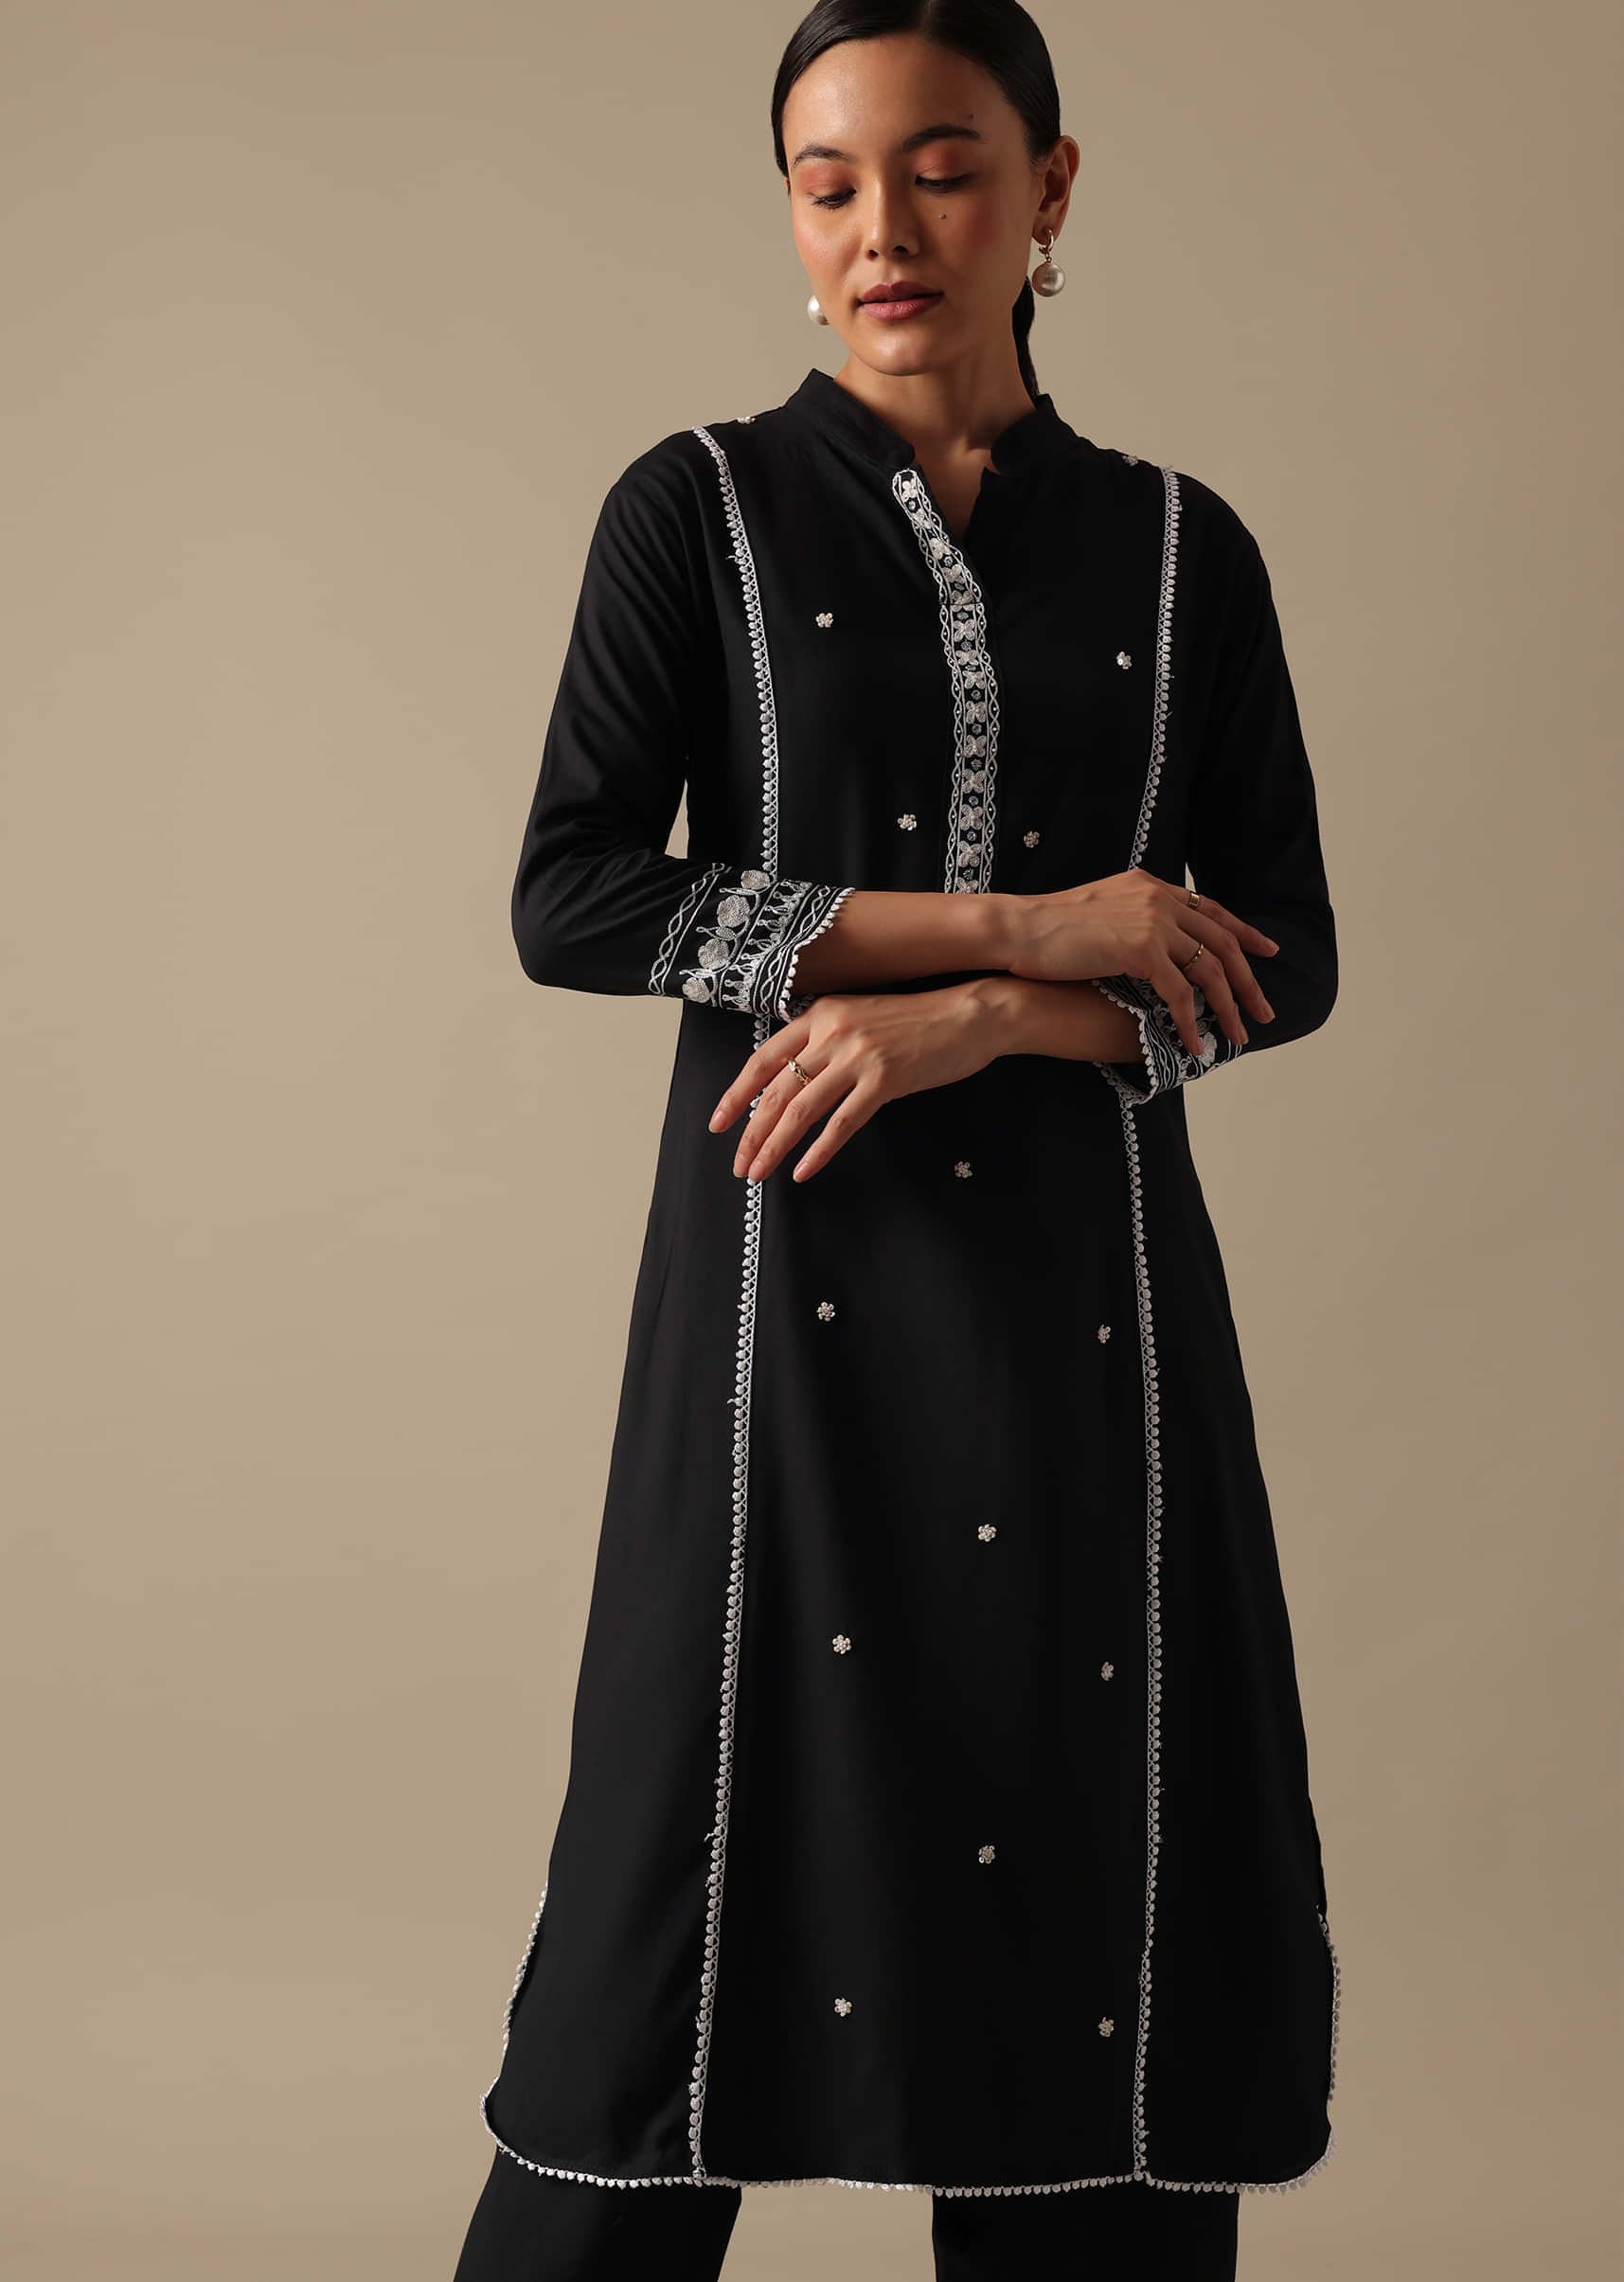 Indian Clothes Under $100 - Ethnic